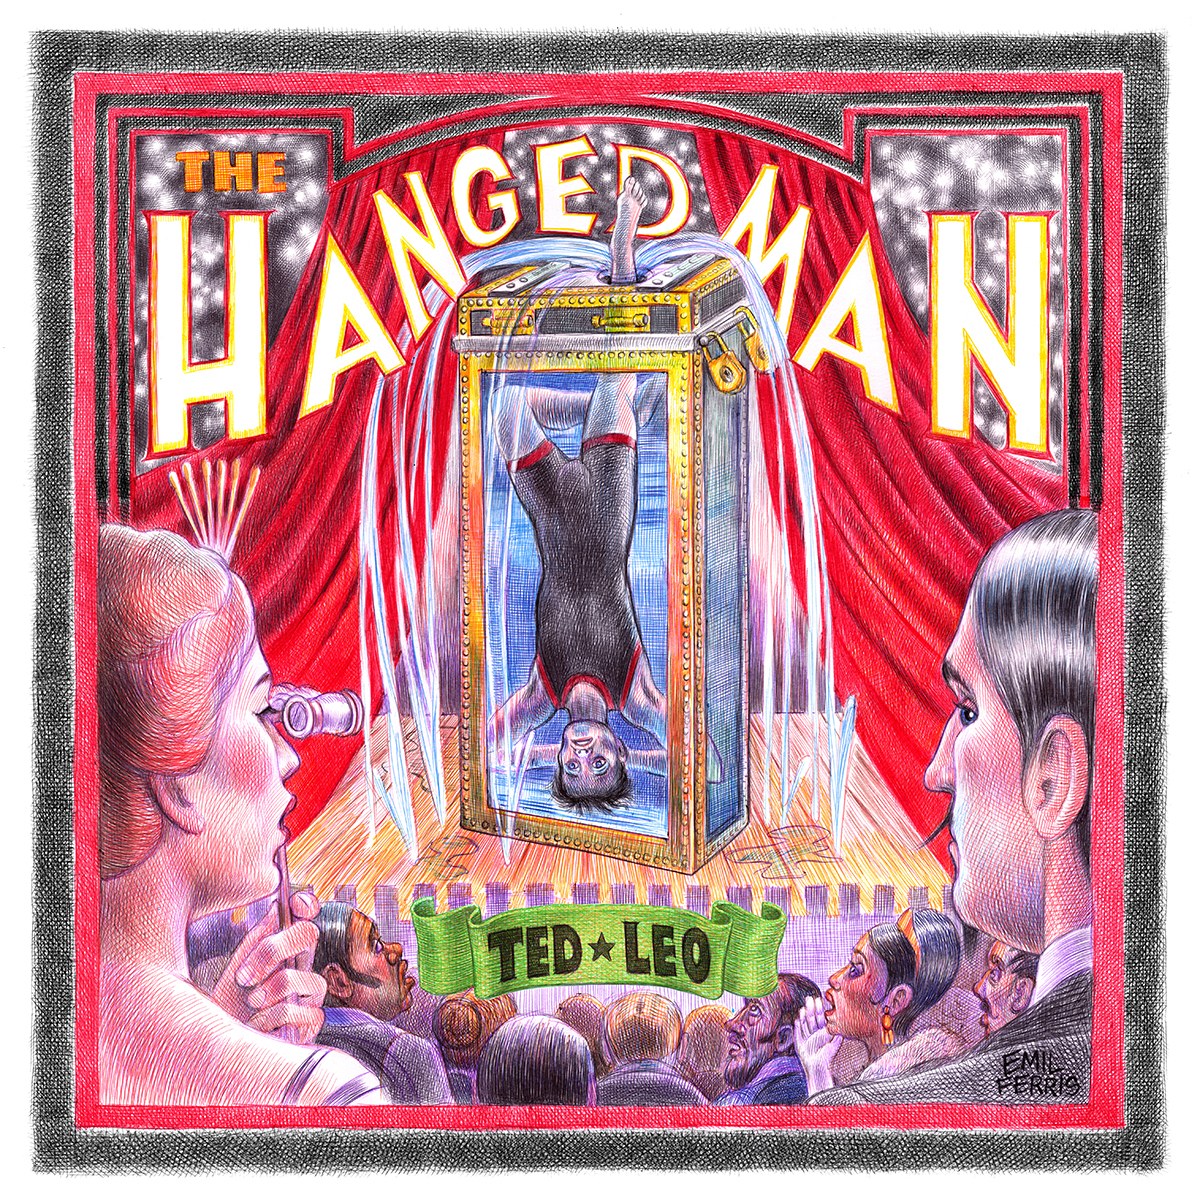 Ted Leo Details New Album <i></noscript>The Hanged Man</i>, Releases First Single “You’re Like Me”” title=”ted3d_smaller_2-1499355856″ data-original-id=”248119″ data-adjusted-id=”248119″ class=”sm_size_full_width sm_alignment_center ” data-image-source=”professional” />
<p>1. Moon Out of Phase<br />
2. Used to Believe<br />
3. Can’t Go Back<br />
4. The Future<br />
5. William Weld in the 21st Century<br />
6. The Nazarene<br />
7. Run to the City<br />
8. Gray Havens<br />
9. Make Me Feel Loved<br />
10. The Little Smug Supper Club<br />
11. Anthems of None<br />
12. You’re Like Me<br />
13. Lonsdale Avenue<br />
14. Let’s Stay on the Moon</p><div class=